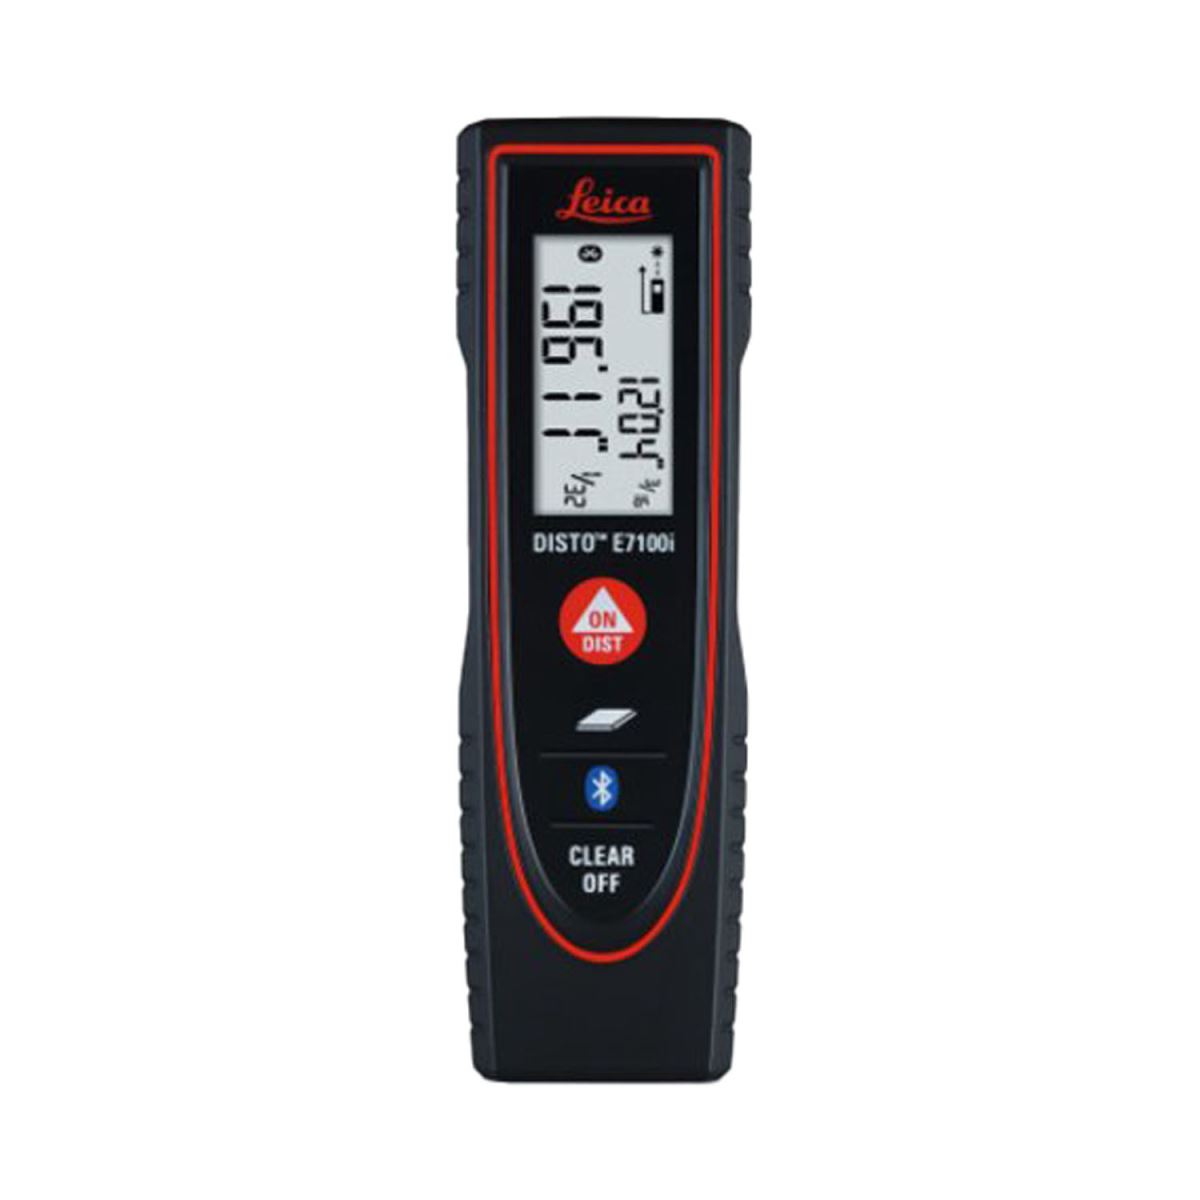 DISTO E7100i LASER DISTANCE METER WITH THREE MEASURING MODES